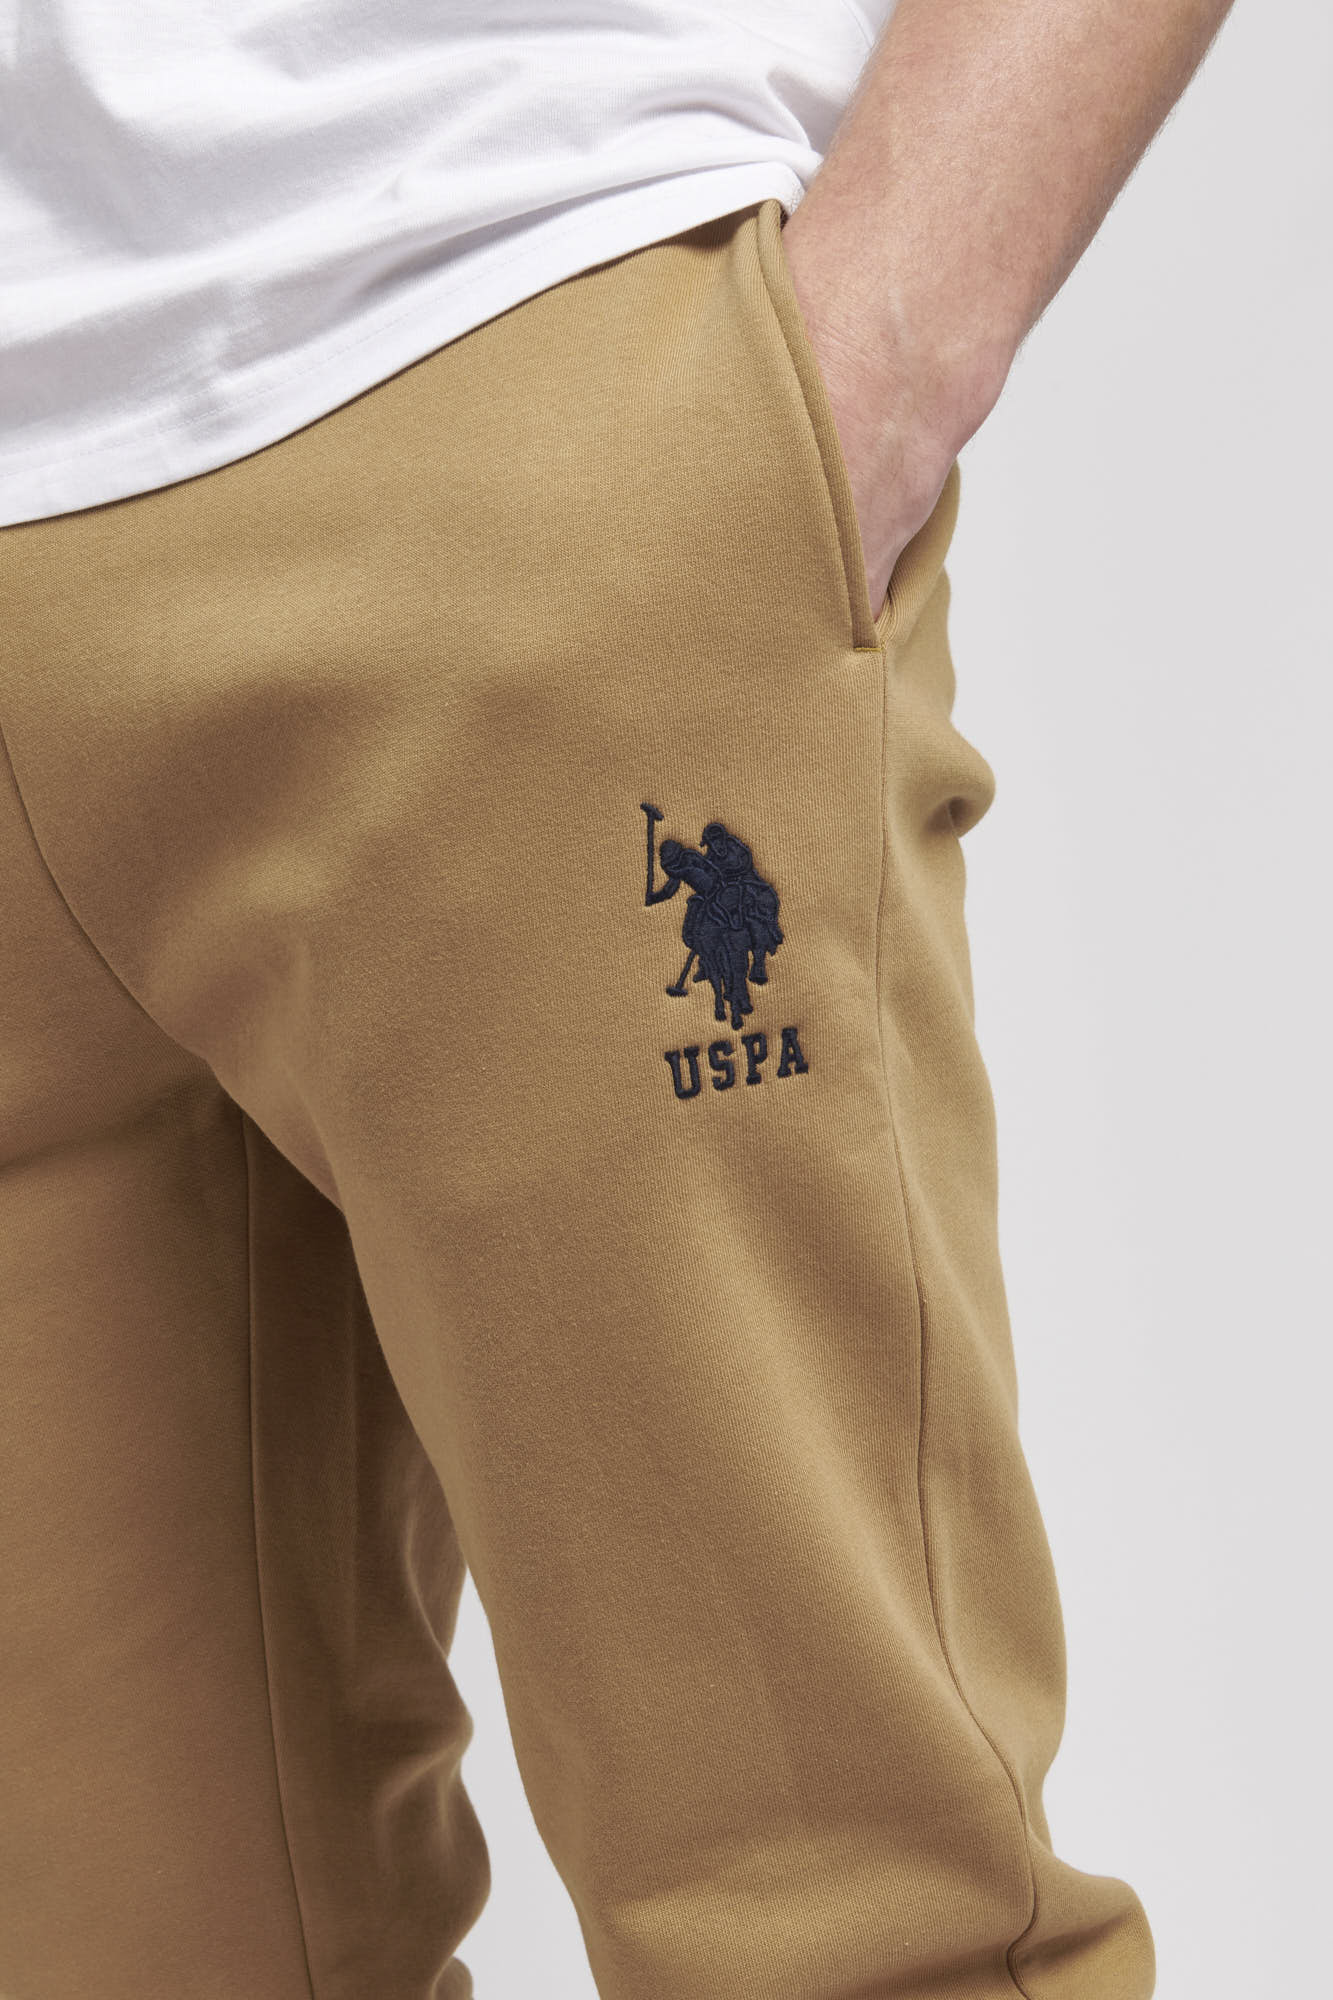 Mens Player 3 Joggers in Tigers Eye